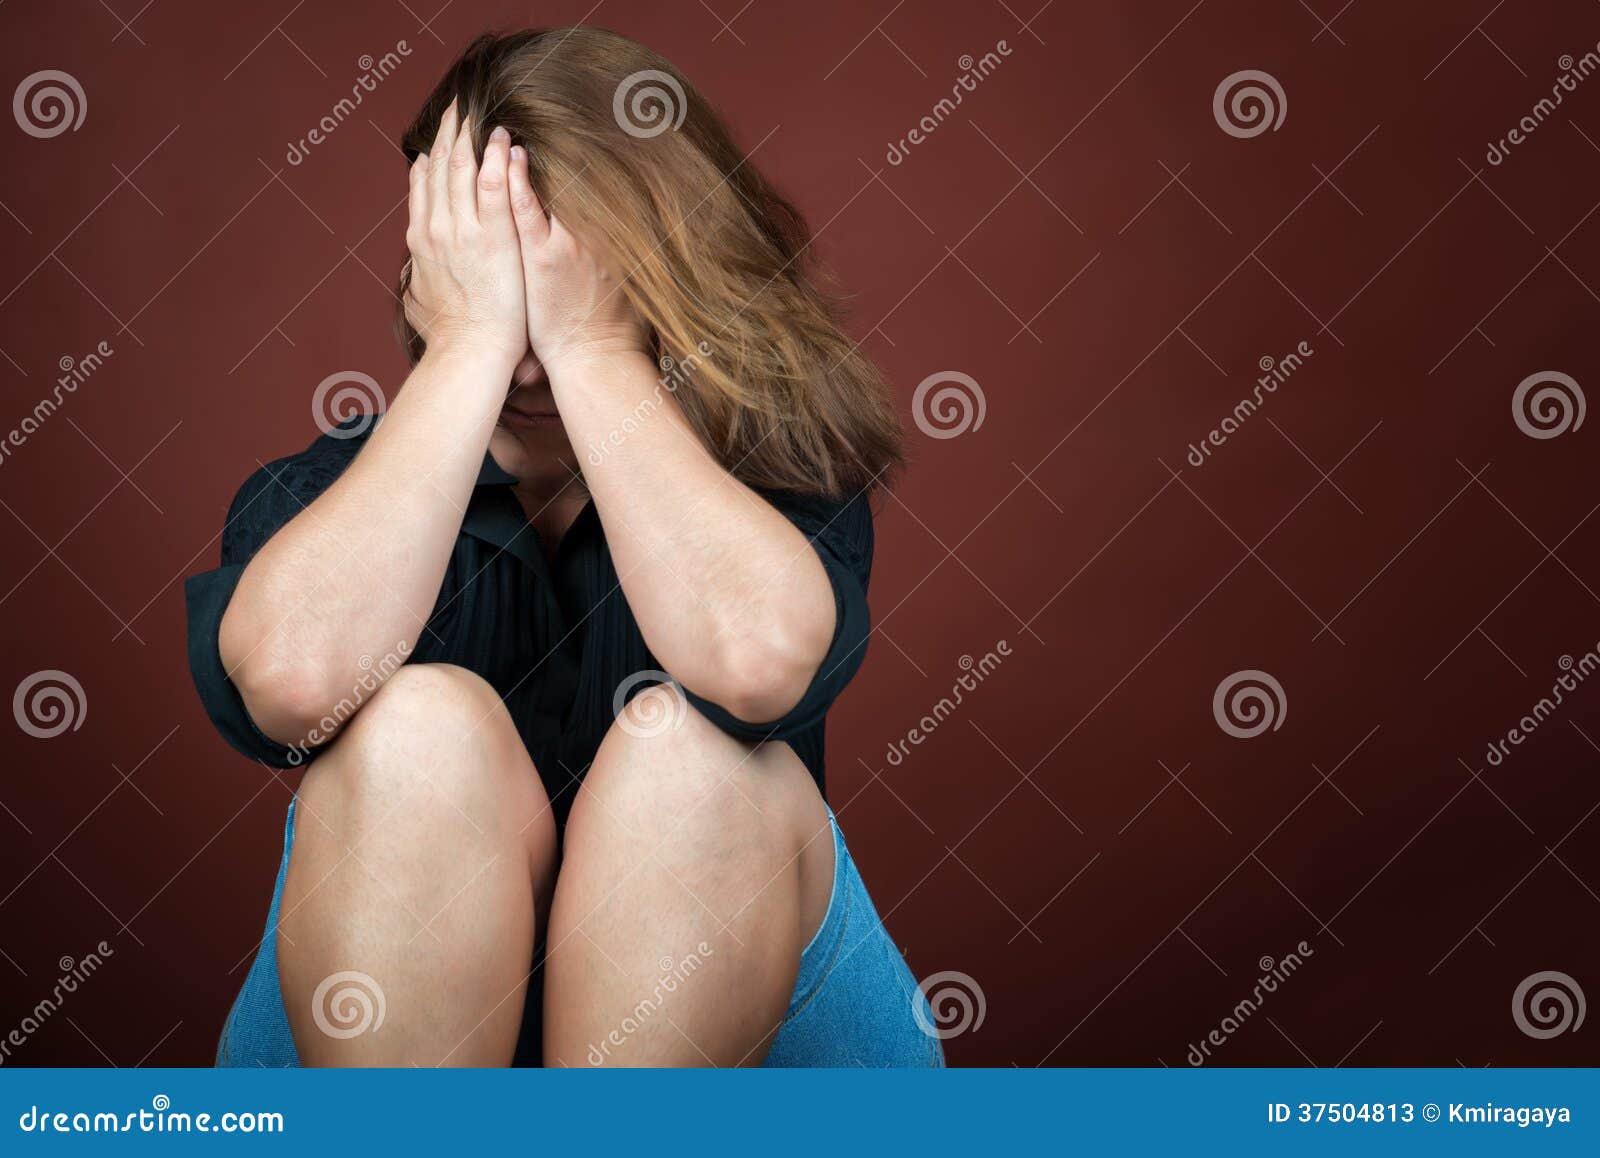 Sad and Lonely Woman Crying Stock Image - Image of beautiful ...